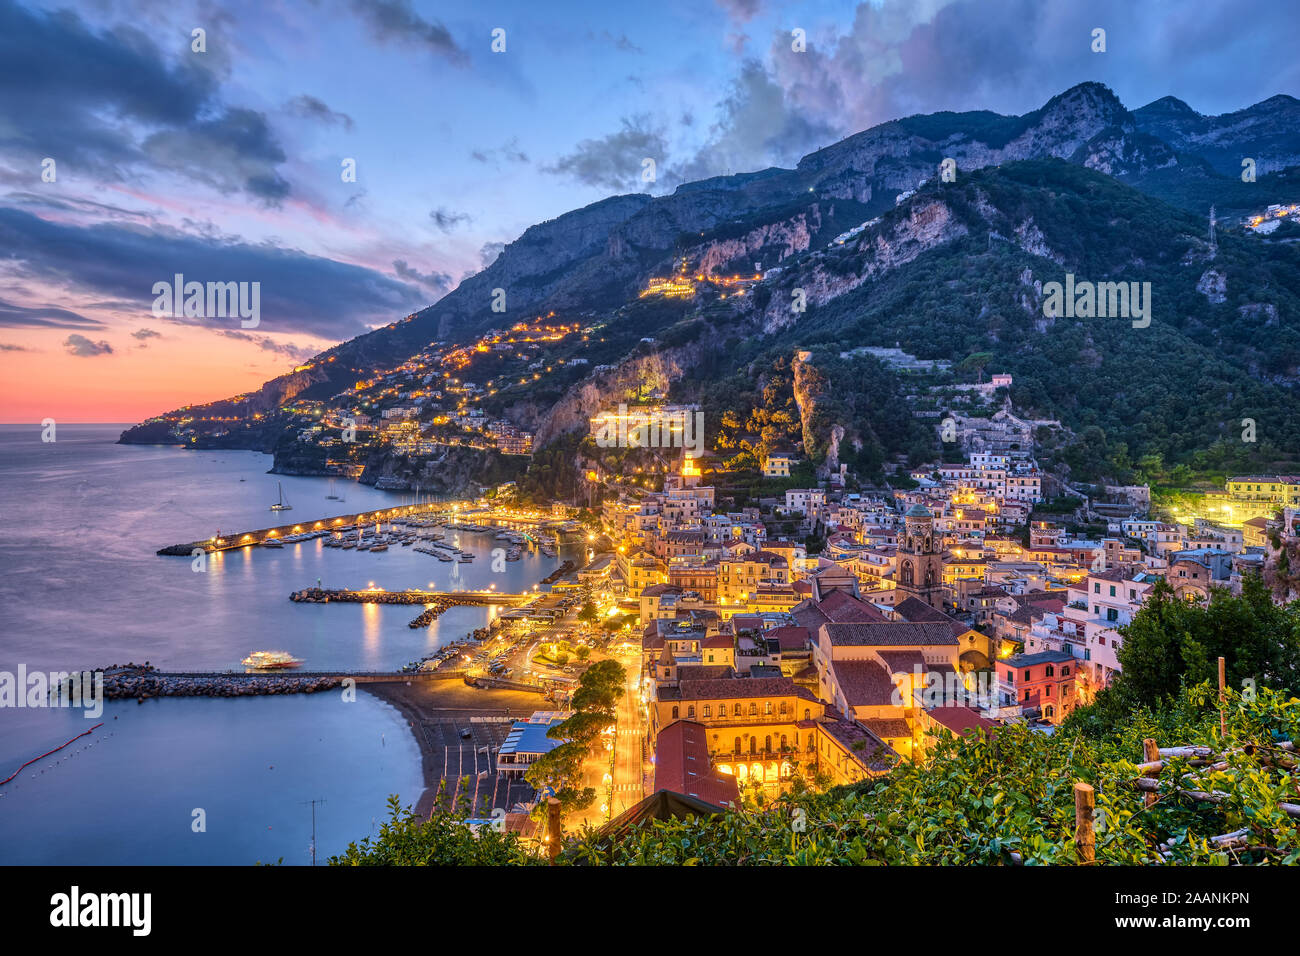 The beautiful village of Amalfi in Italy at sunset Stock Photo